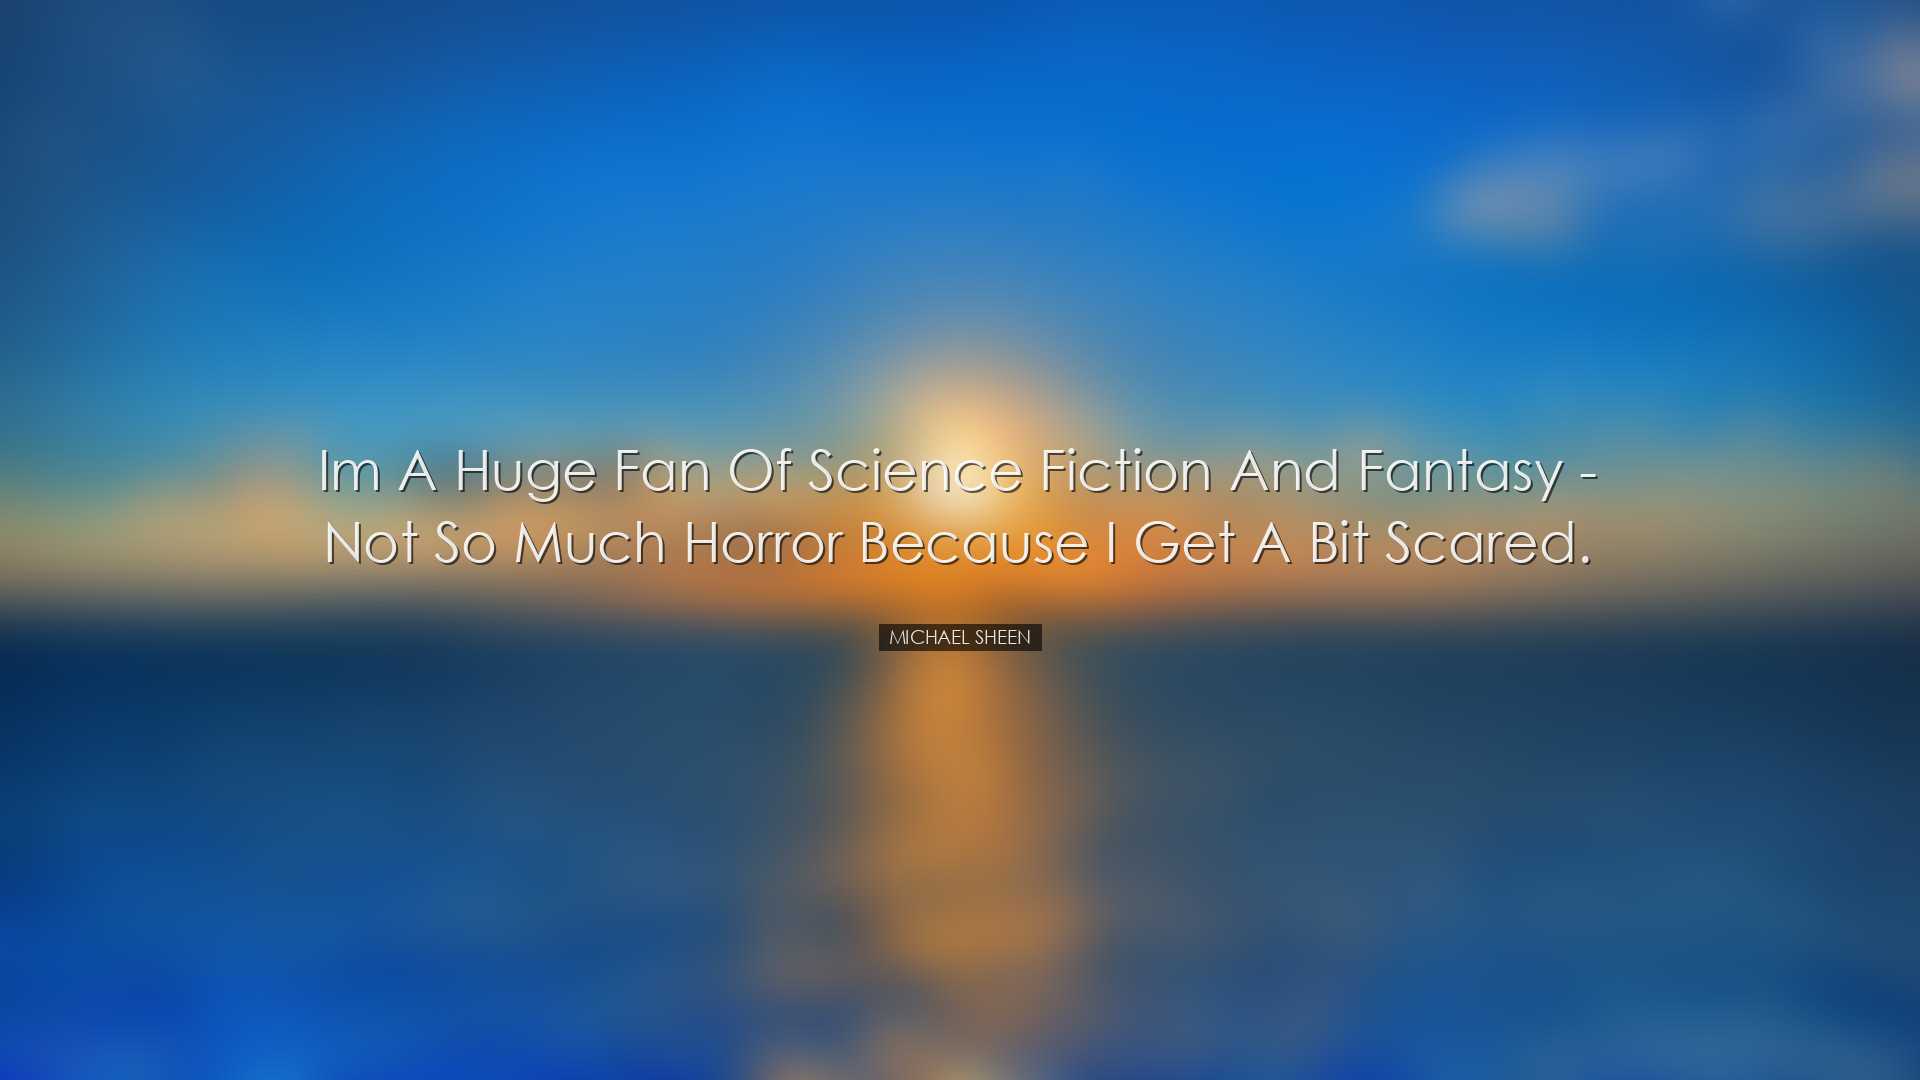 Im a huge fan of science fiction and fantasy - not so much horror